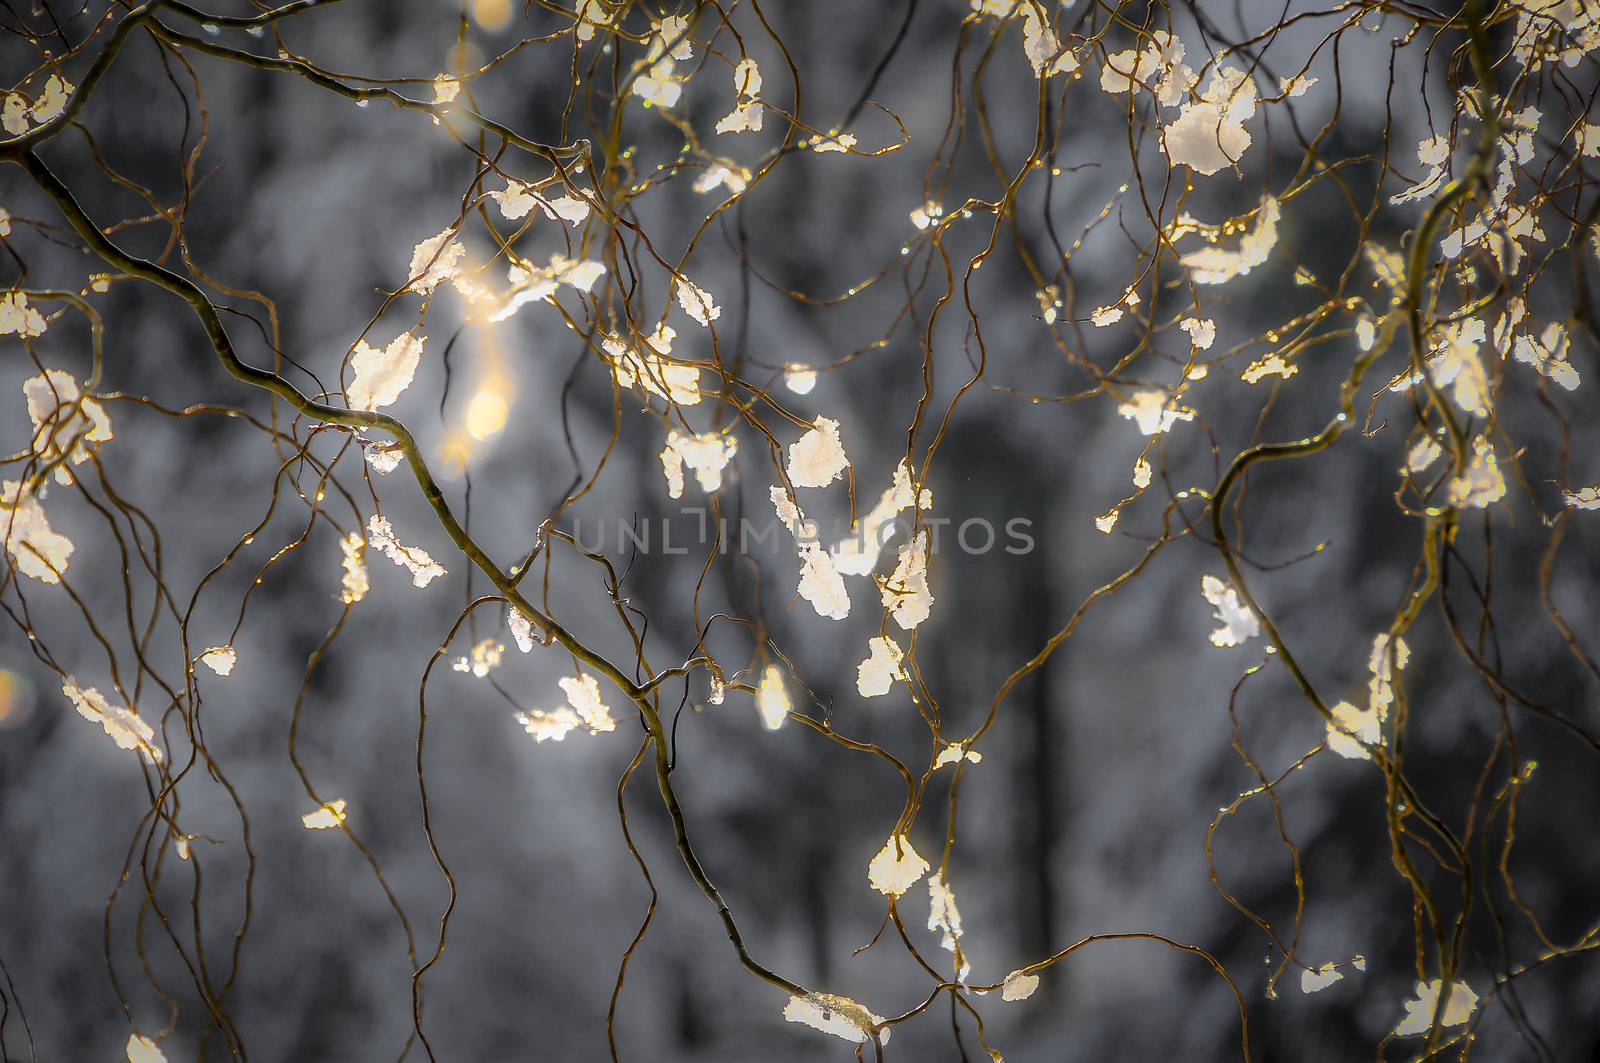 Tree branches and twigs covered in ice and snow, backlit with sunlight, providing stunning sparkles and golden glitter